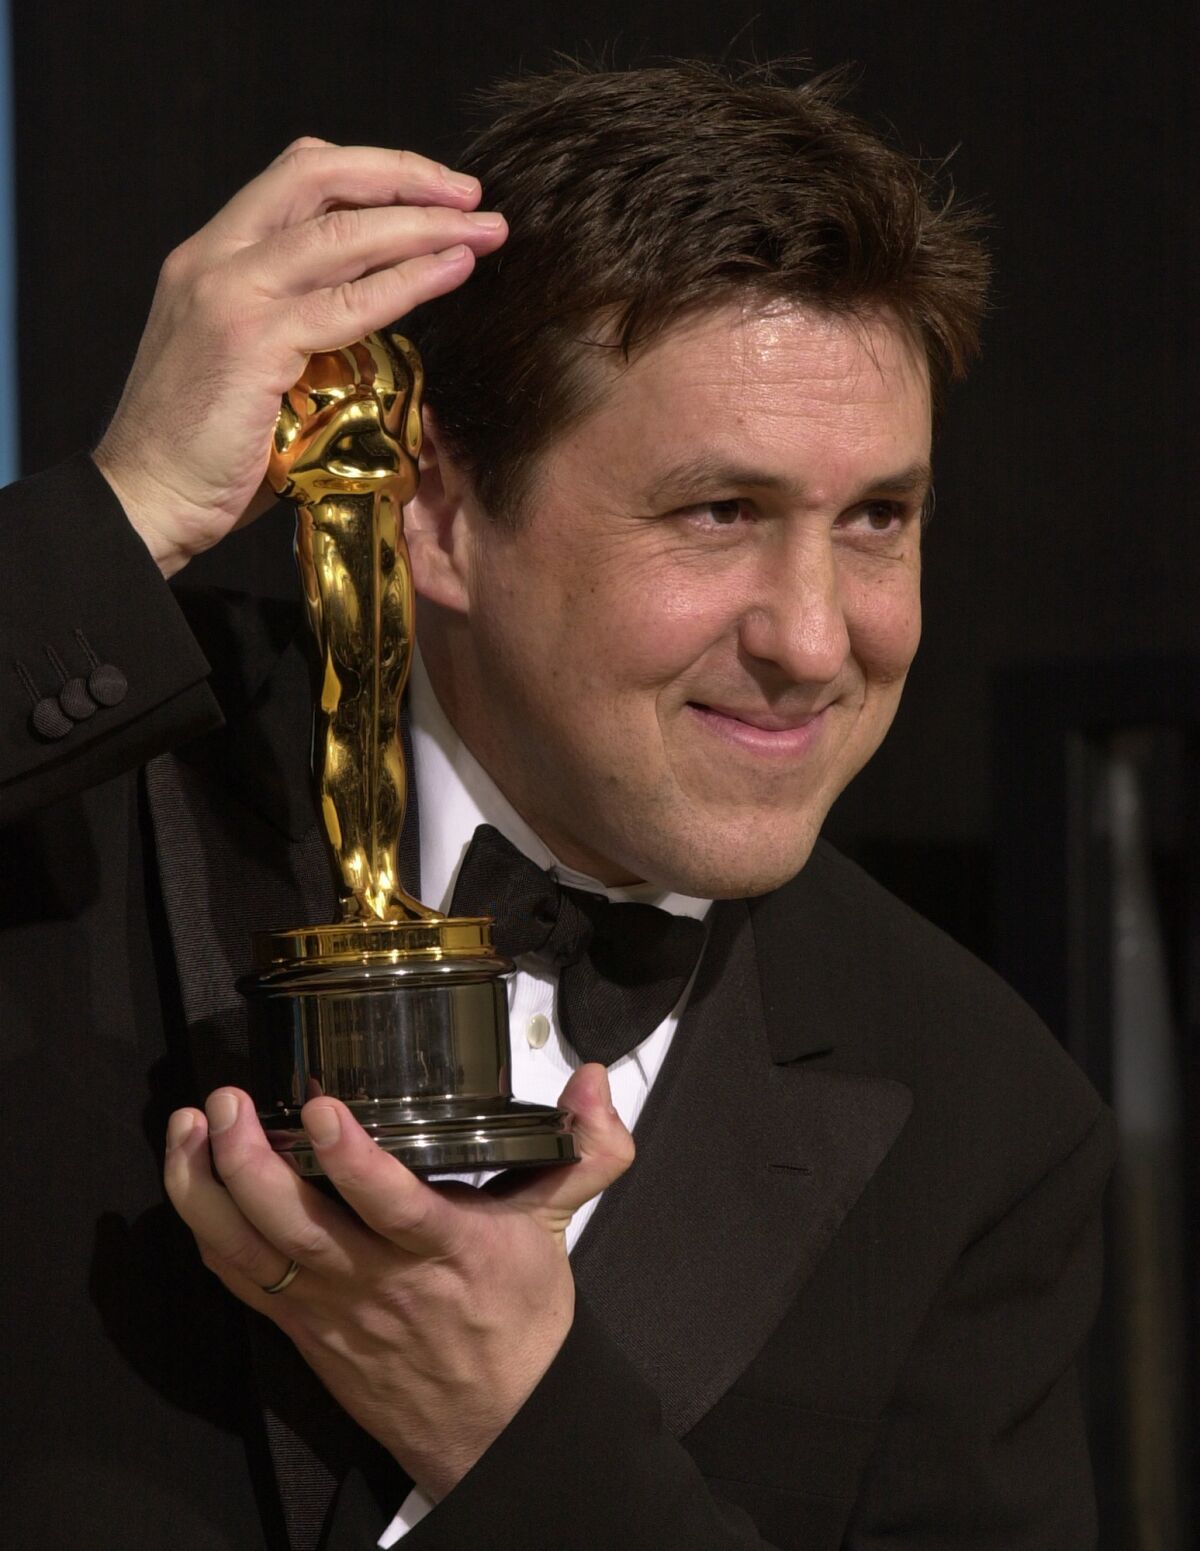 Cameron Crowe shows off his Oscar for the screenplay to "Almost Famous" in 2001.